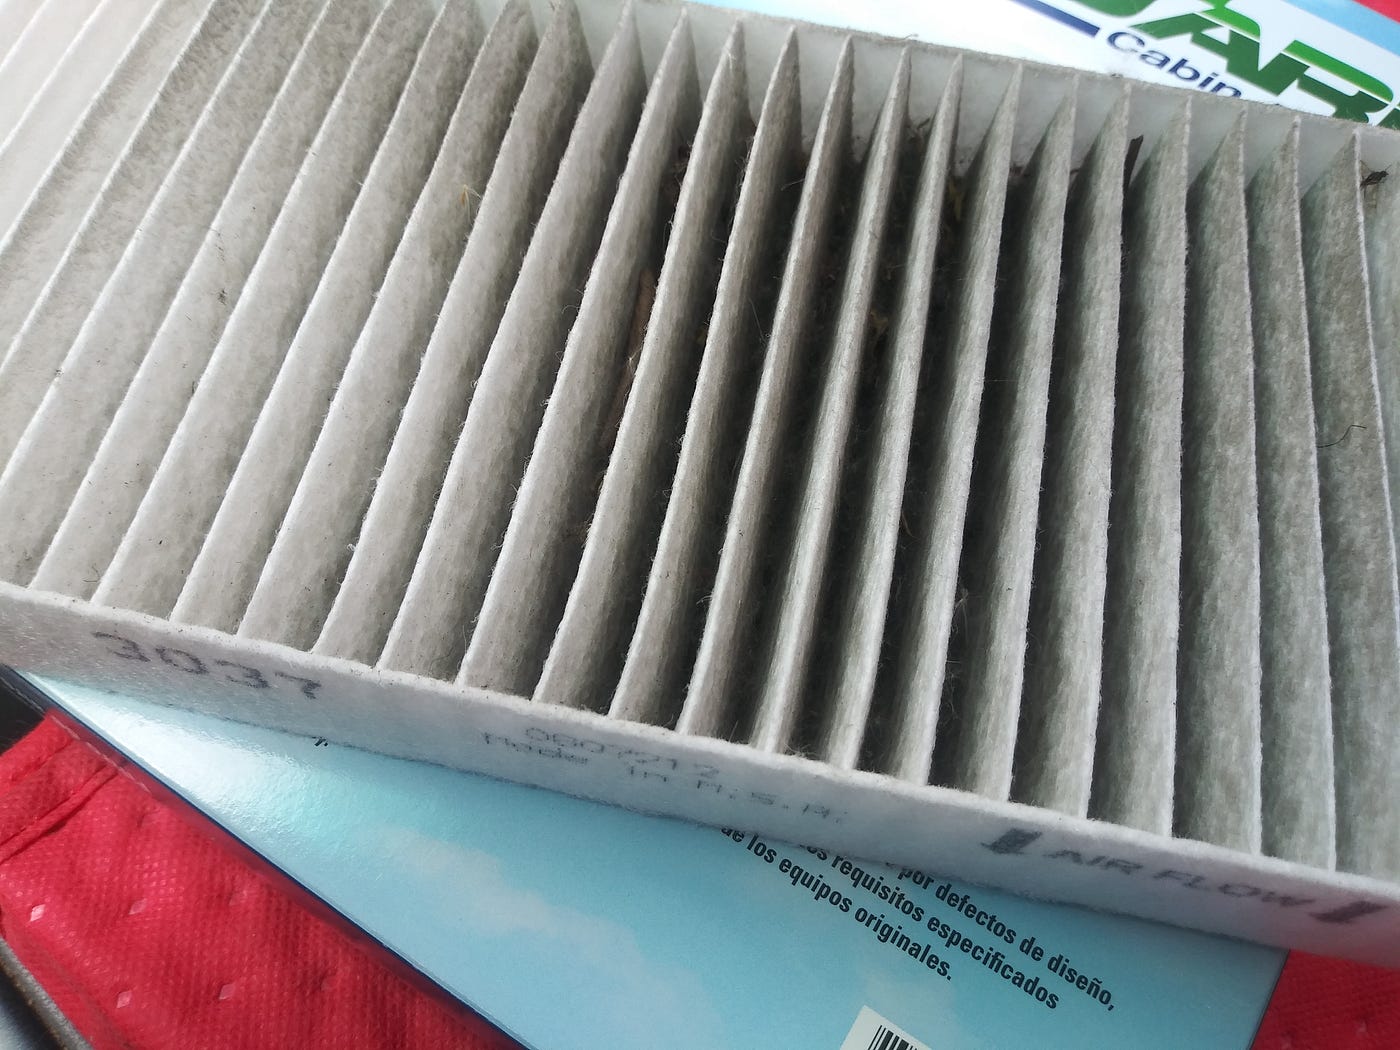 How To Change A Car Cabin Air Filter, by Ami Soule